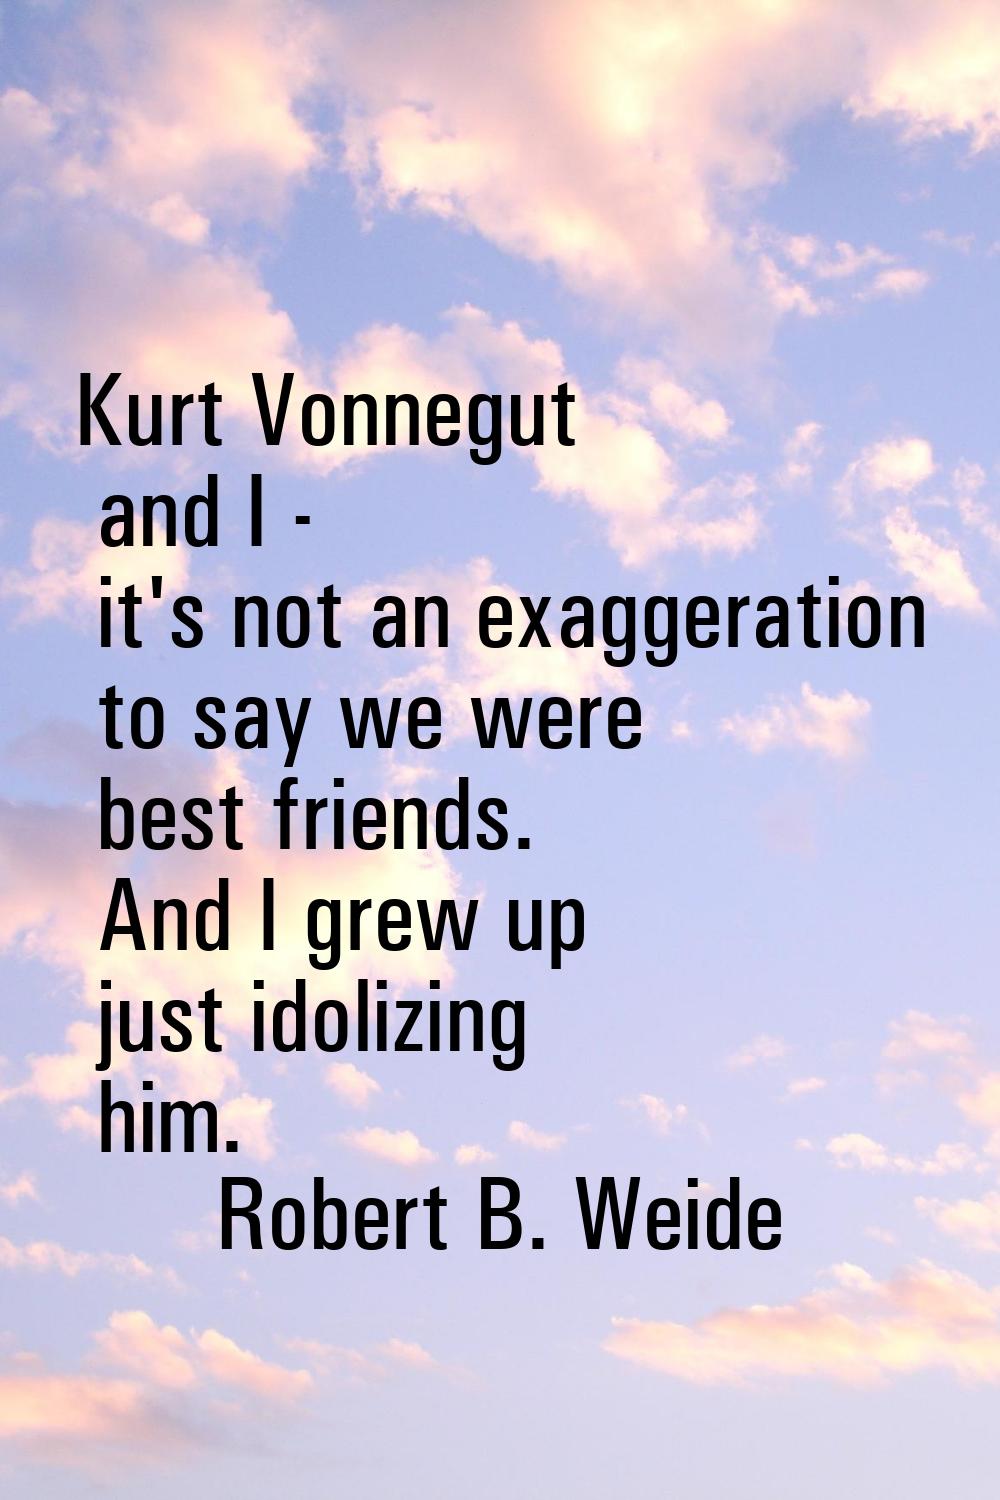 Kurt Vonnegut and I - it's not an exaggeration to say we were best friends. And I grew up just idol